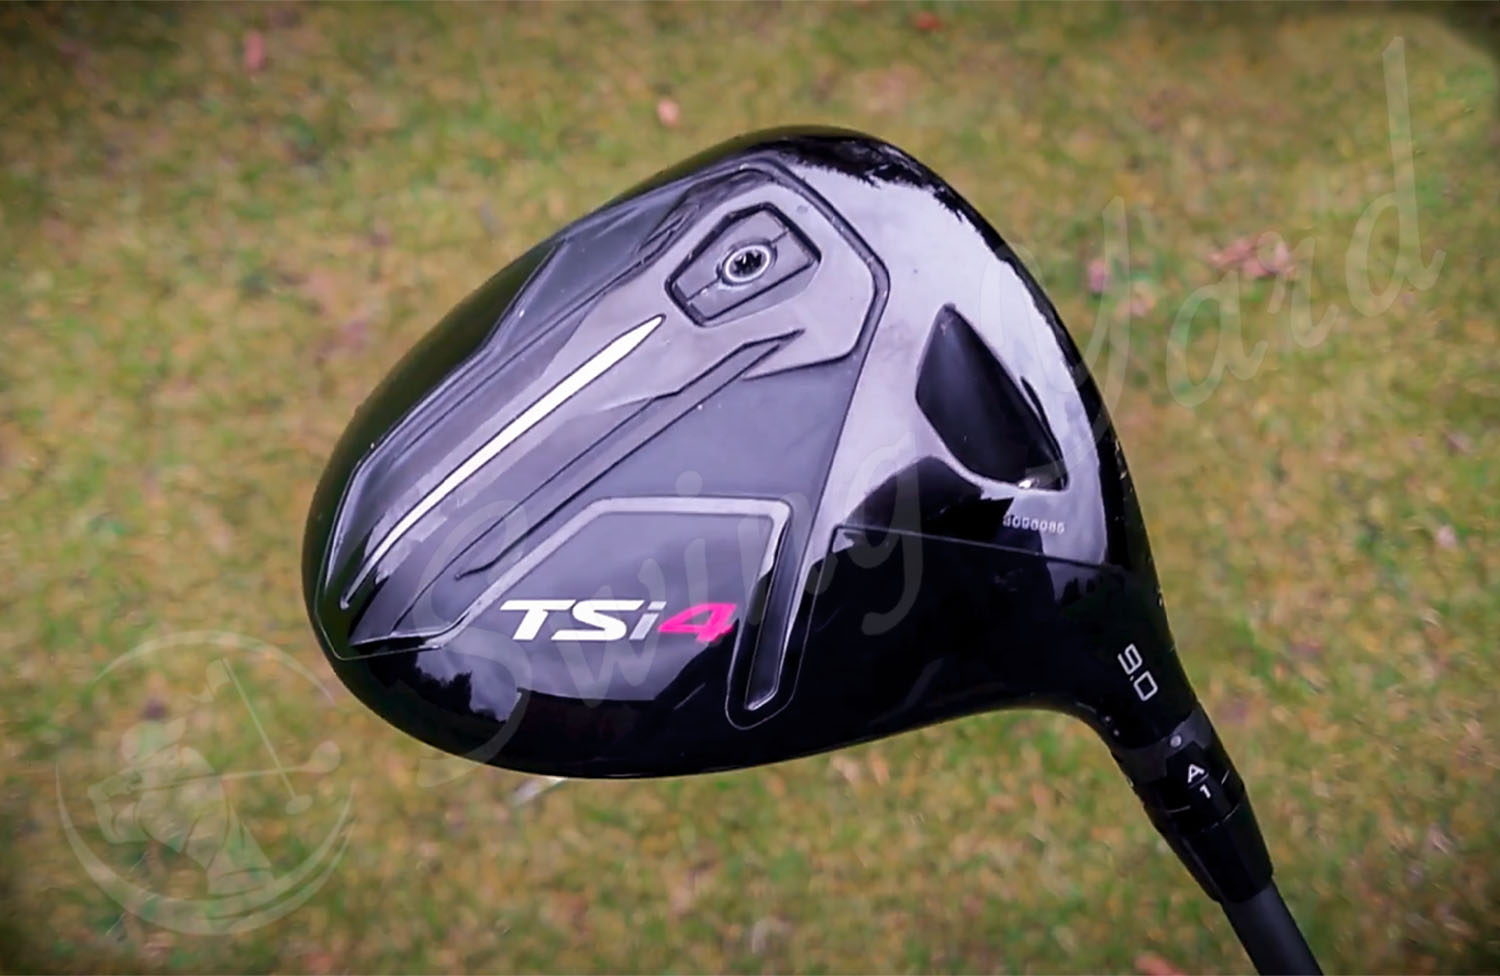 My Titleist TSi4 driver for testing at the golf course